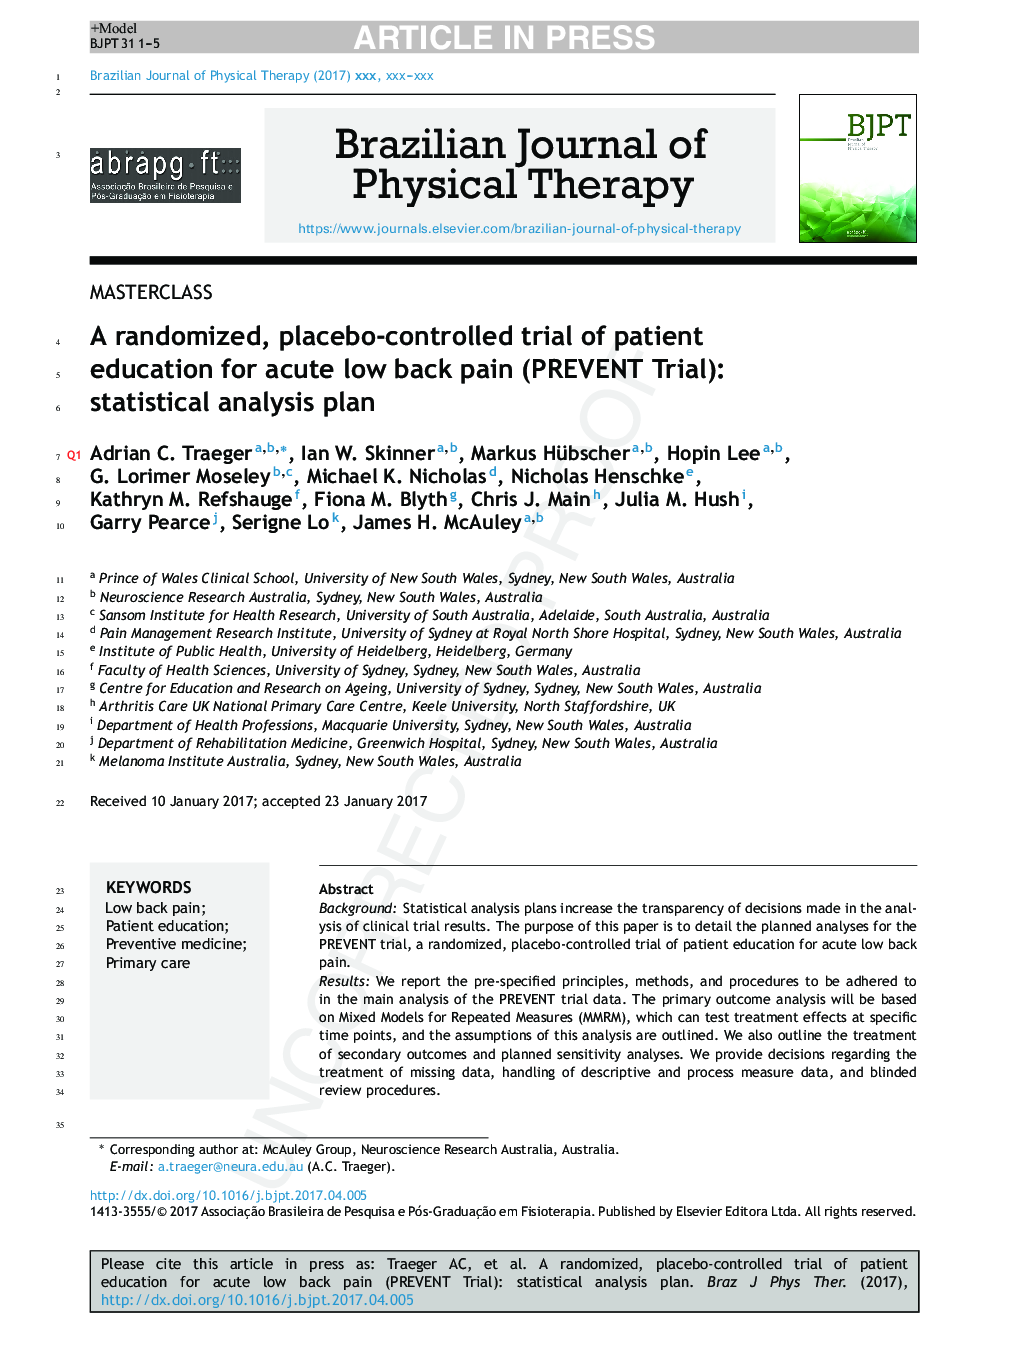 A randomized, placebo-controlled trial of patient education for acute low back pain (PREVENT Trial): statistical analysis plan